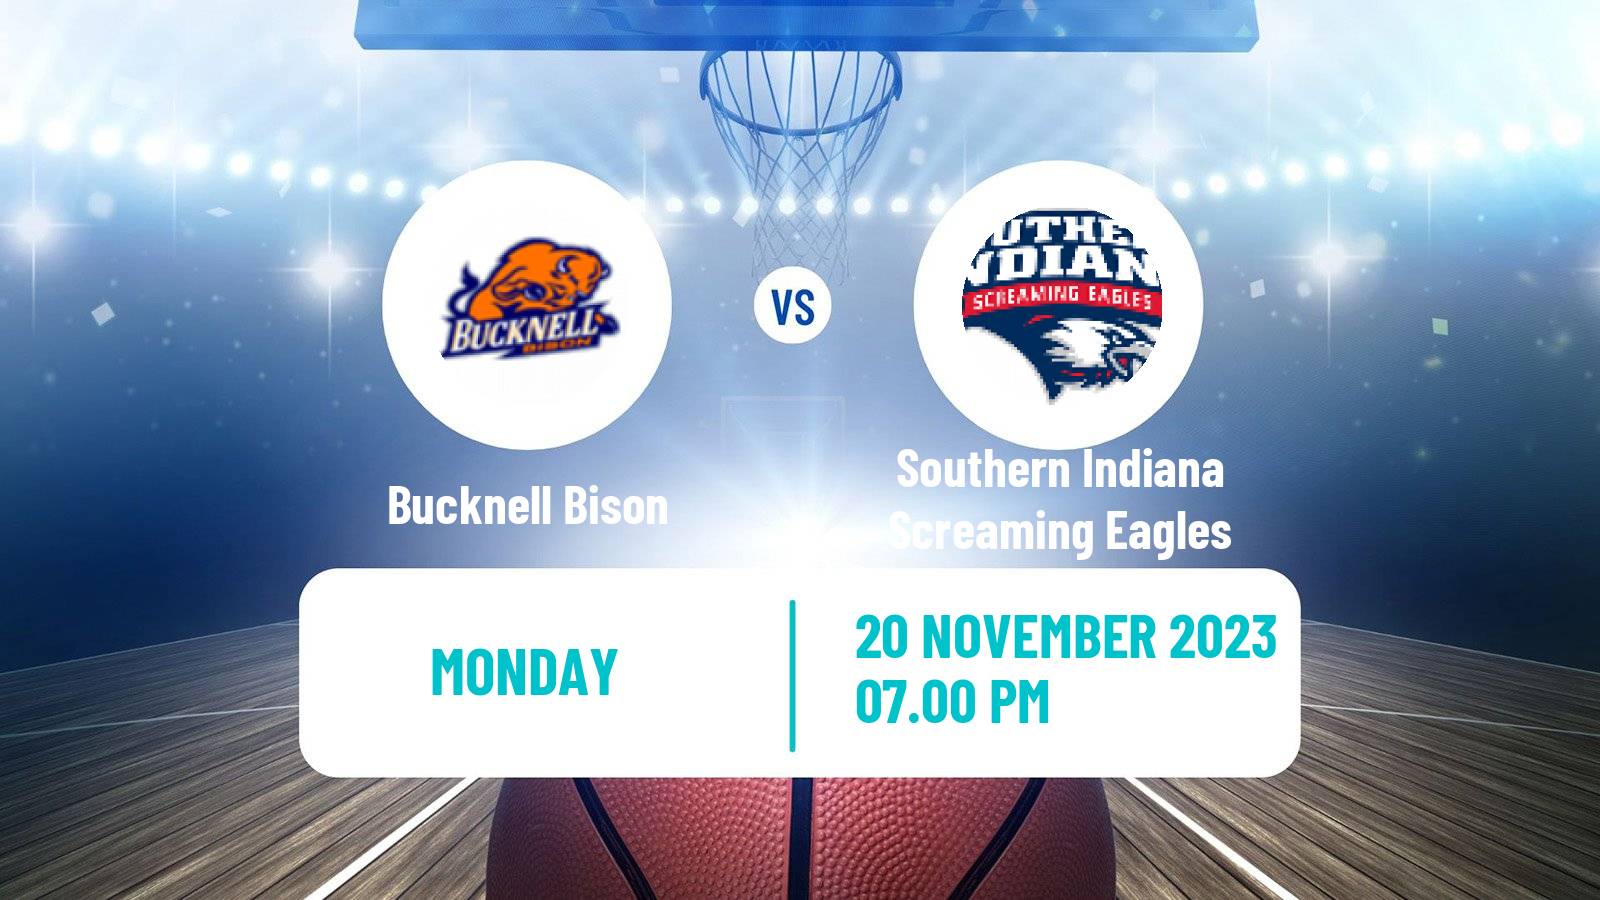 Basketball NCAA College Basketball Bucknell Bison - Southern Indiana Screaming Eagles